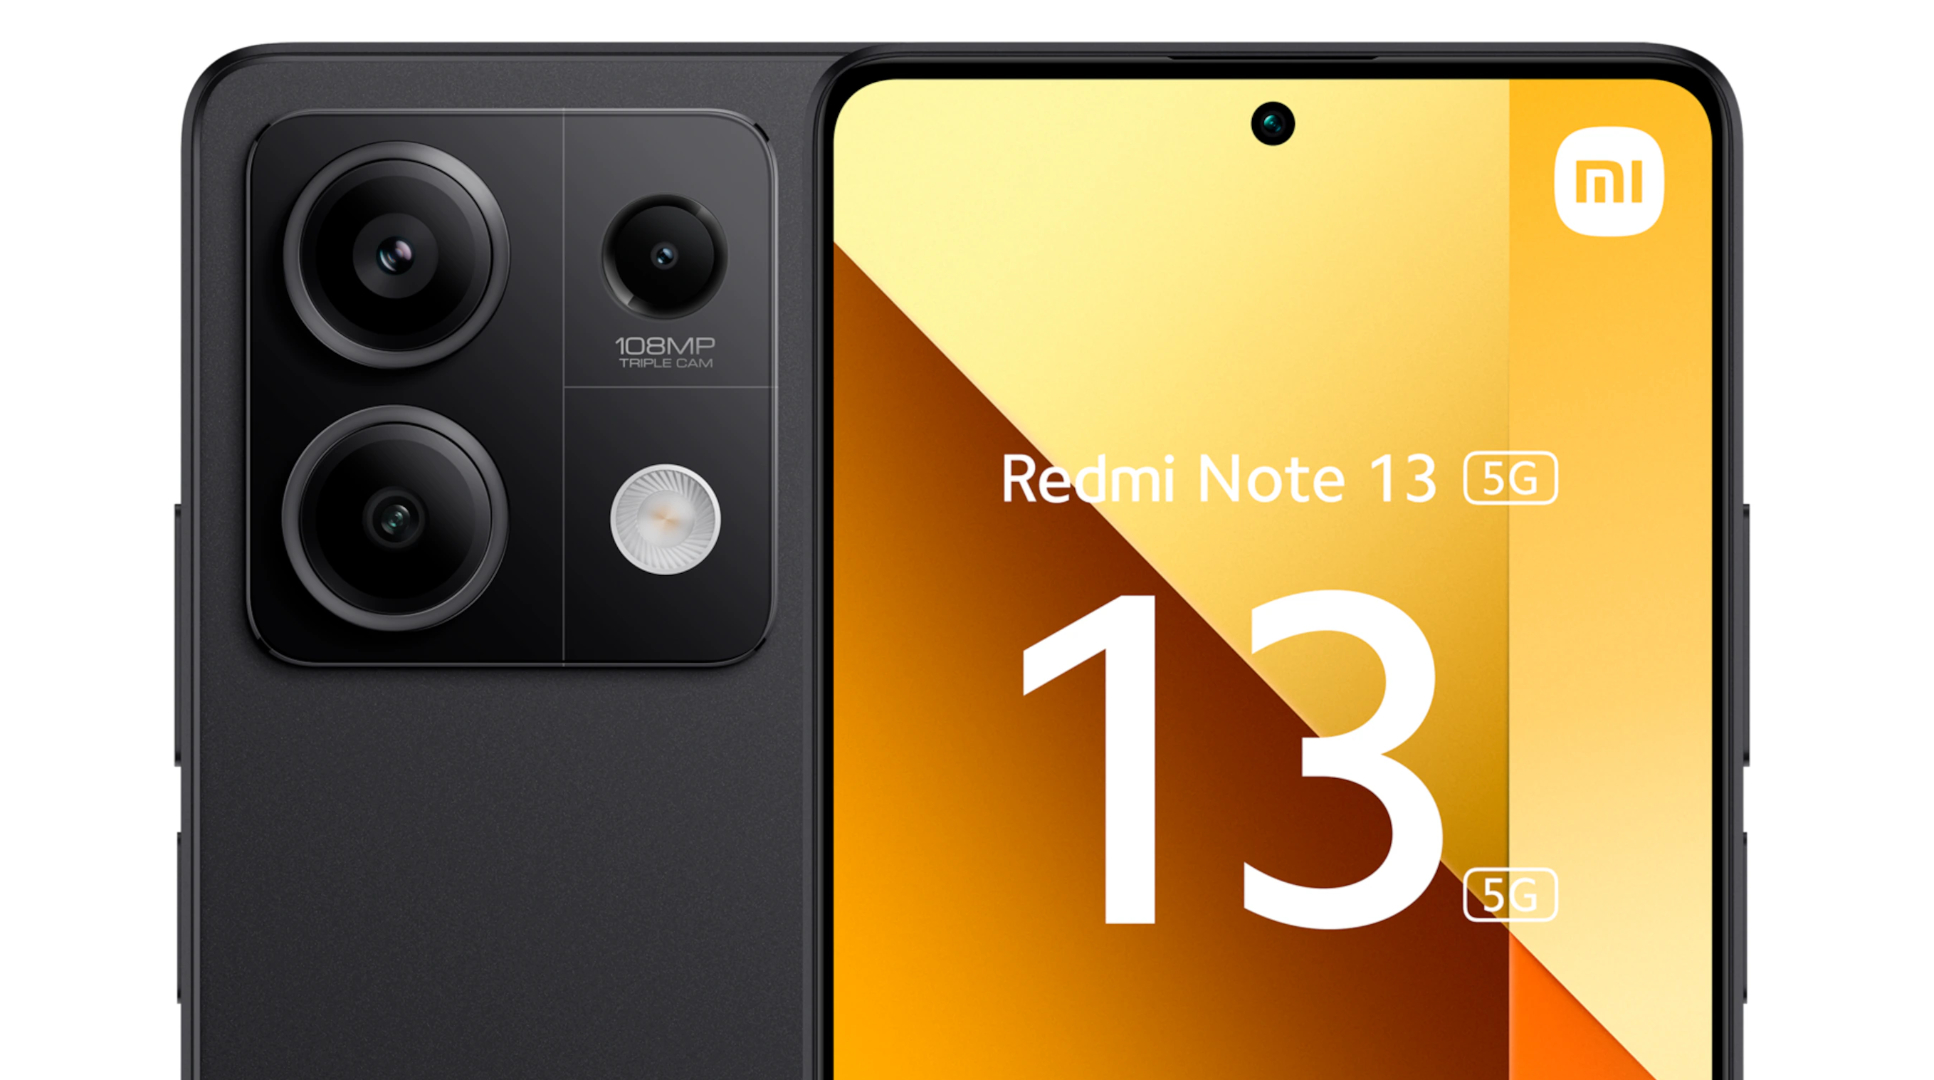 Redmi Note 13 Pro 5G Price in Nepal, Specifications, Availability